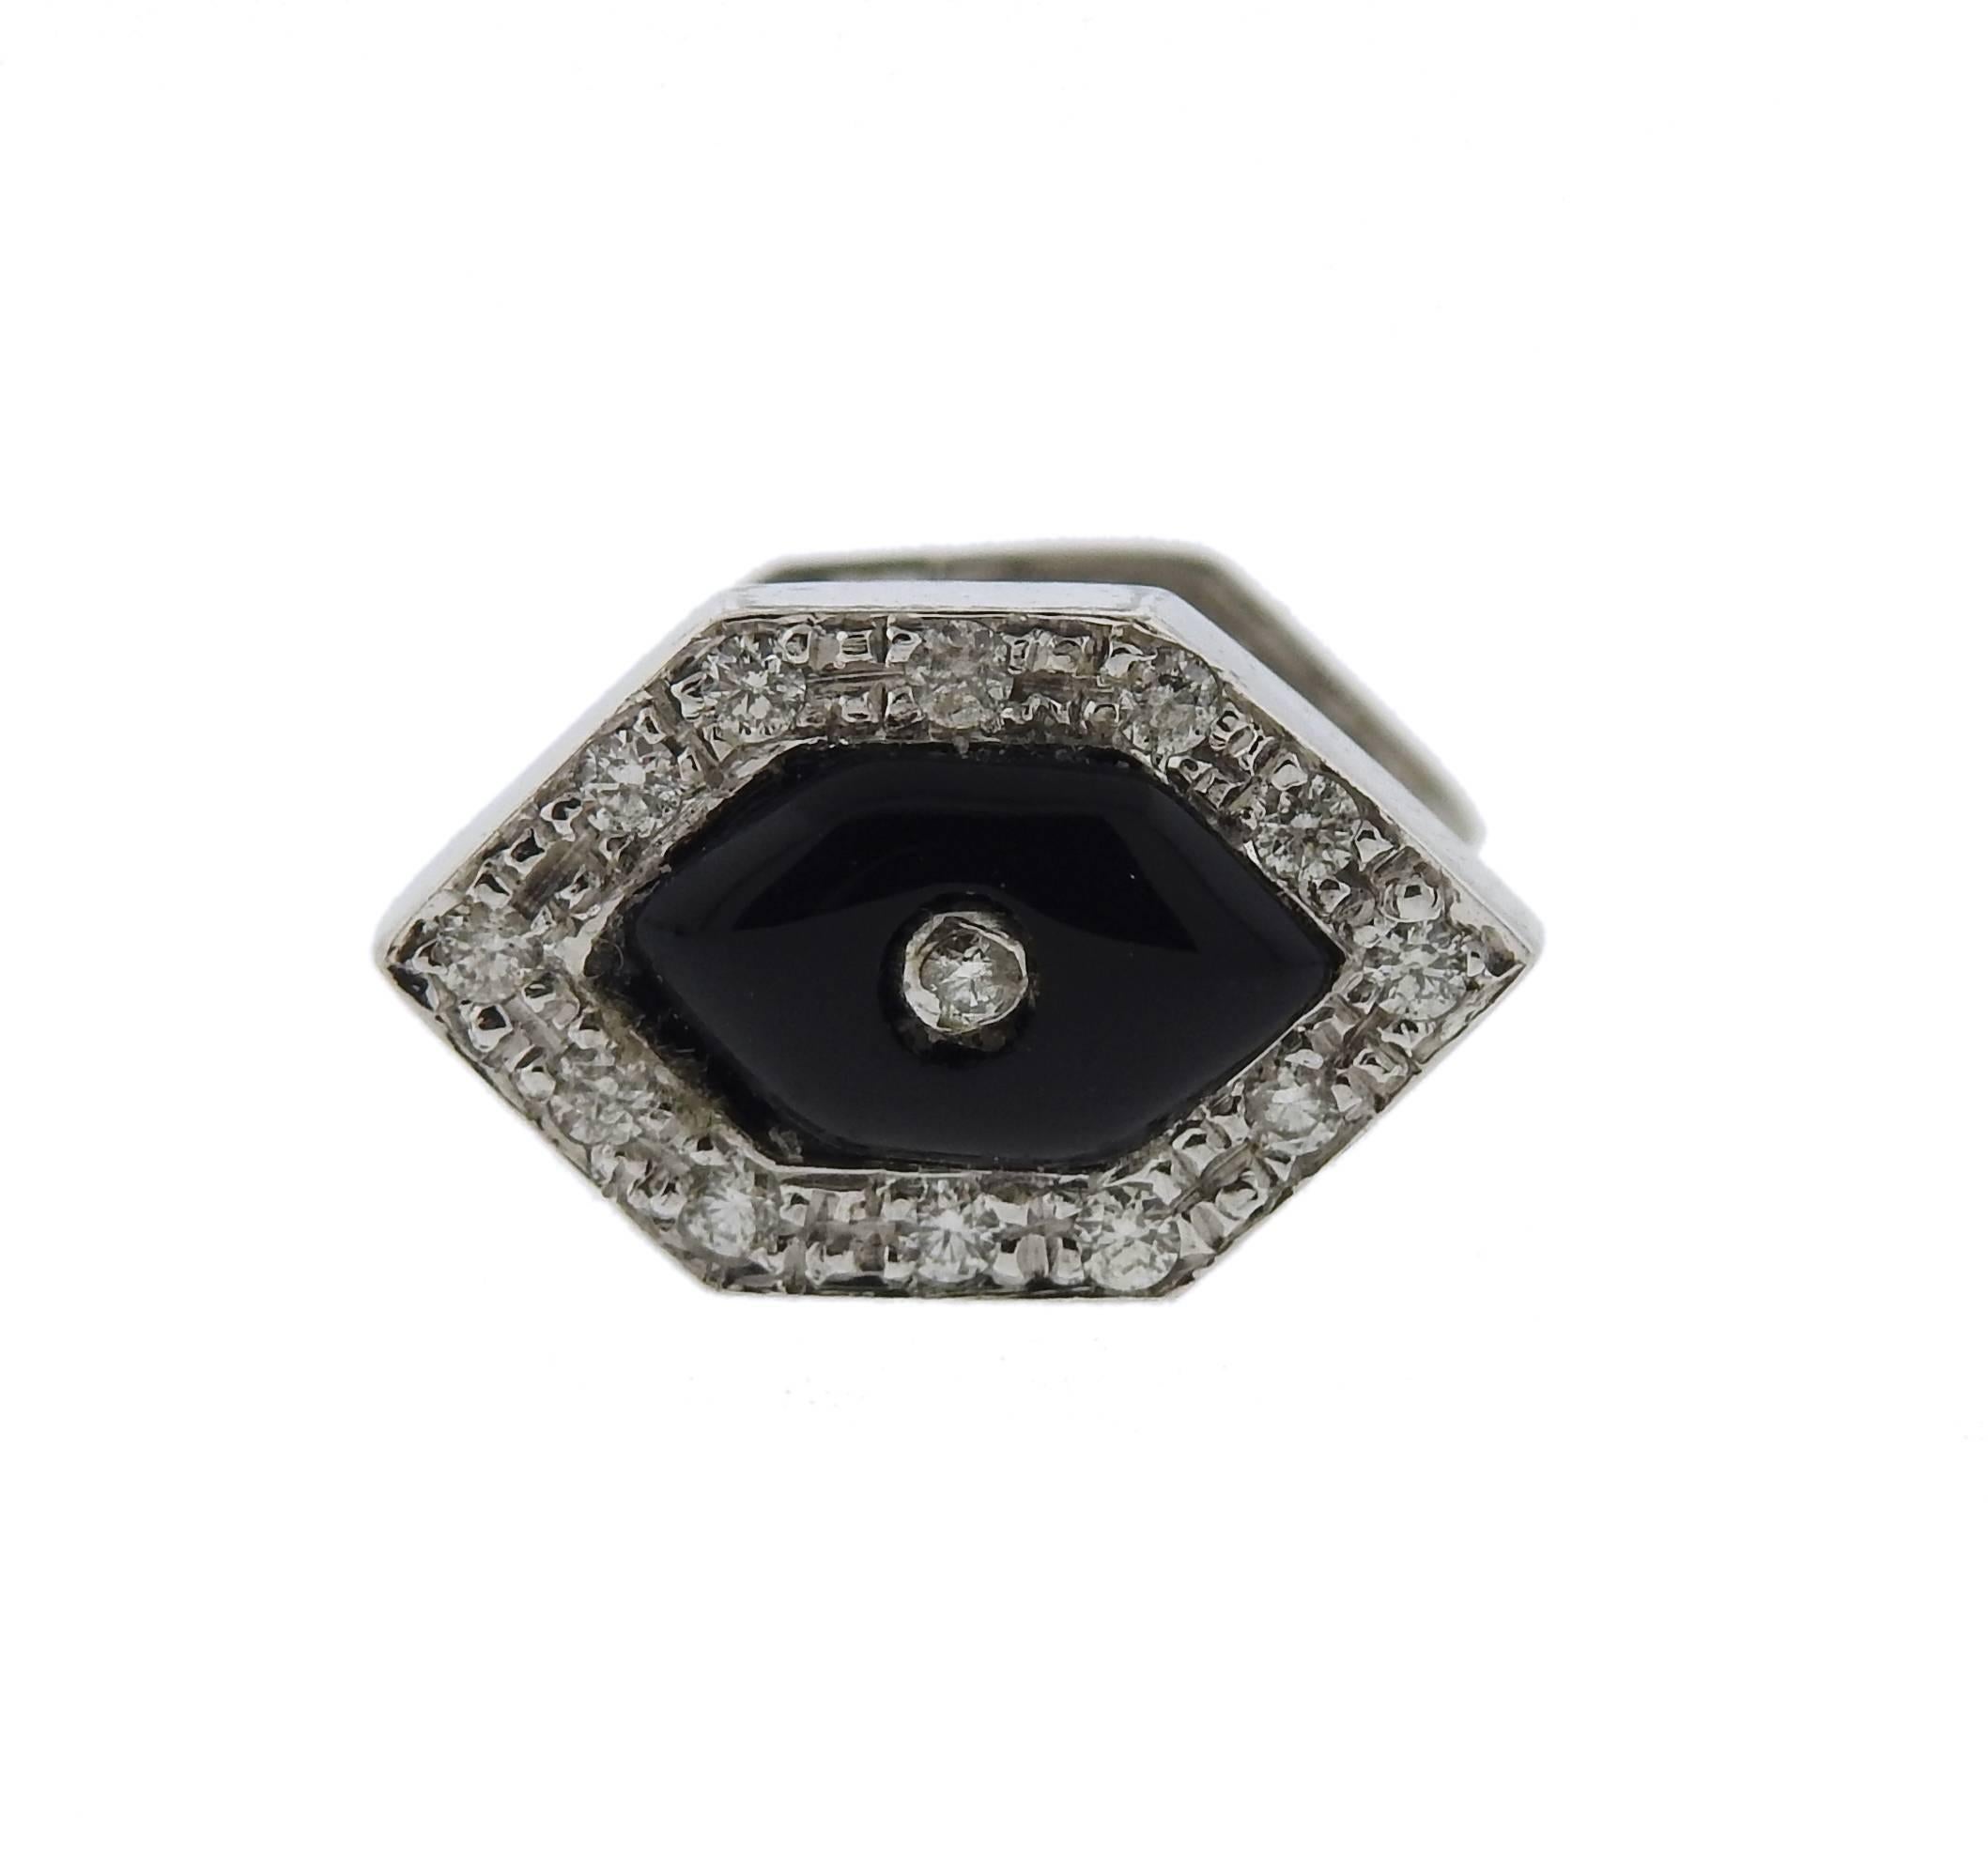 An 18k white gold cufflinks and studs set, crafted by N. Breen & Co, decorated with approx. 1.10ctw in diamonds and onyx. Cufflink top measures 18mm x 12mm, stud top - 13mm x 8mm. Marked: N. Breen & Co, 18k. Weight - 22.7 grams 